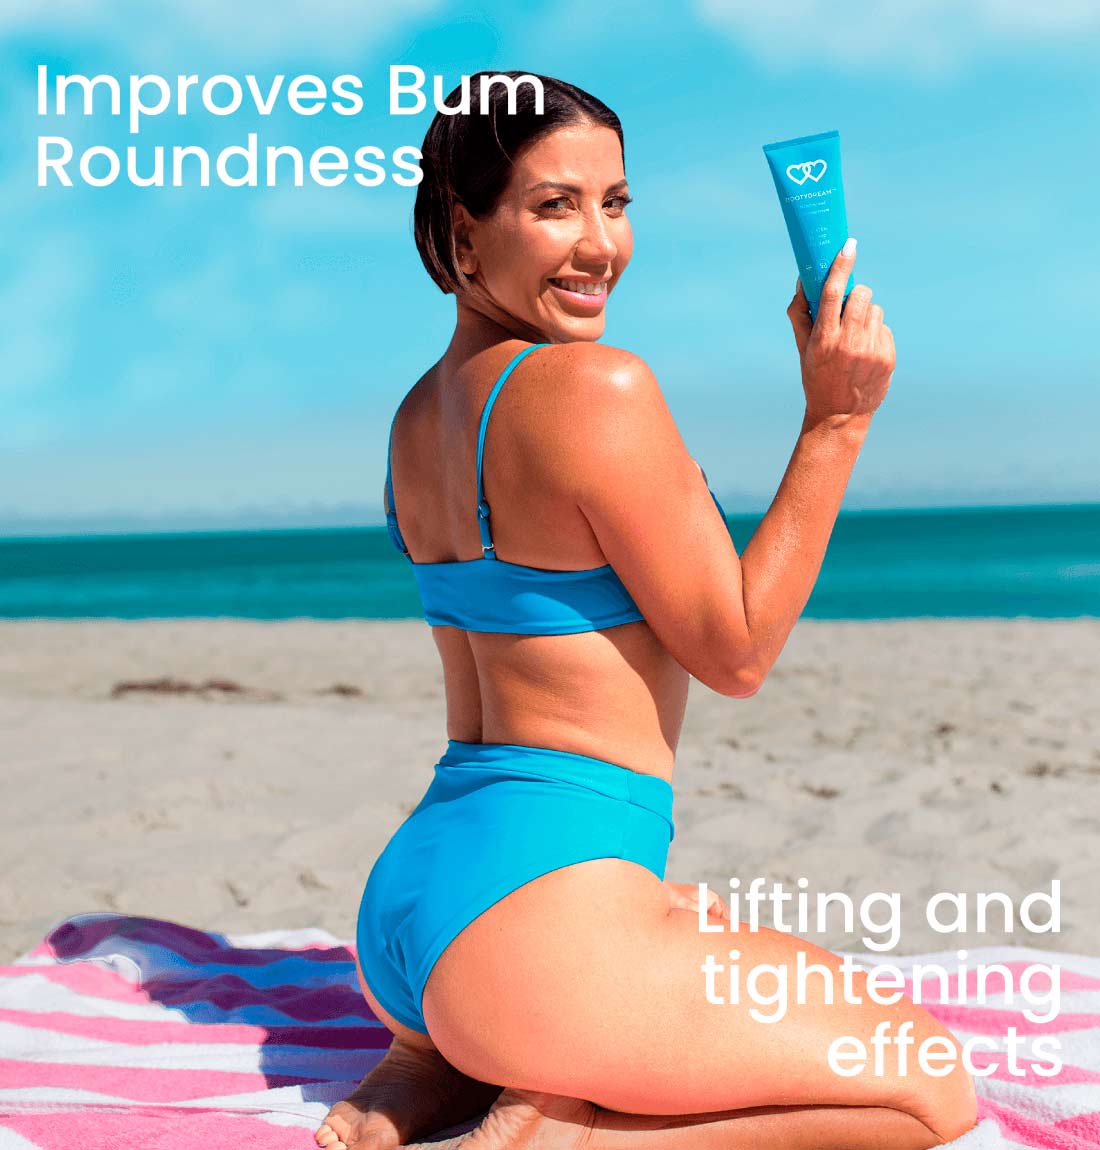 All-Natural Bum, Boob, & Body Shaping Products